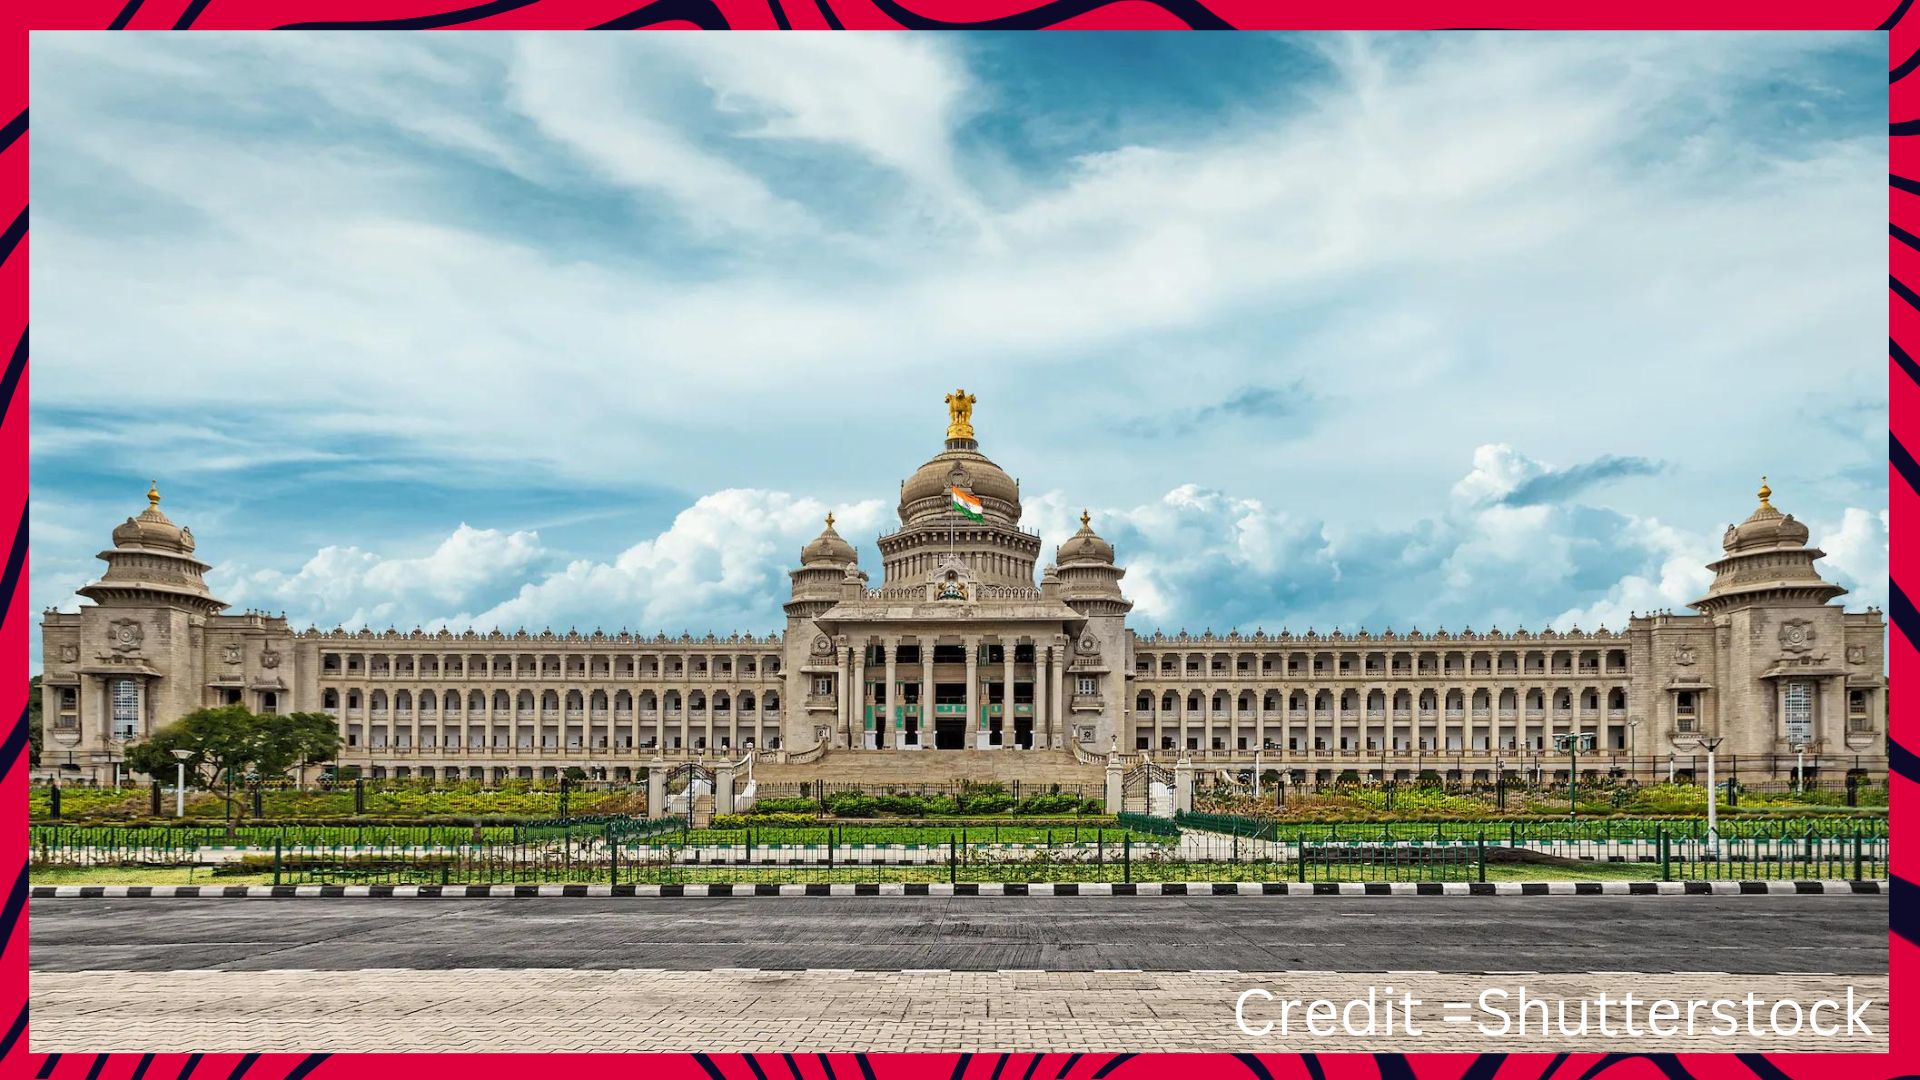 Bengaluru is the 3rd most popular Indian city in the world.